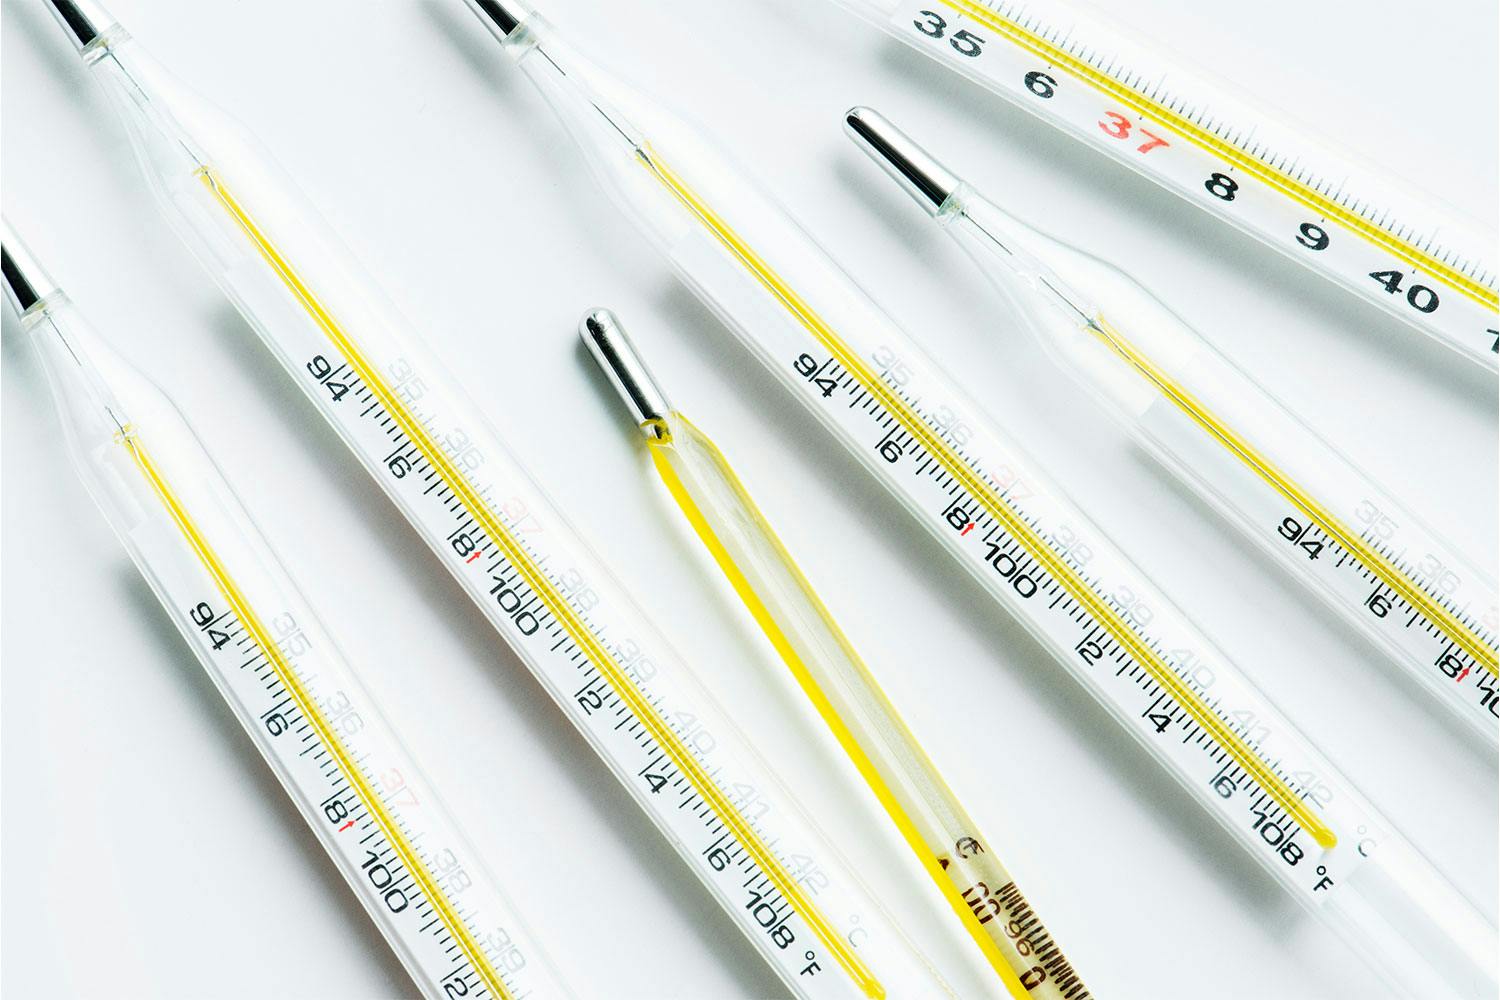 Six glass thermometers with yellow lines along their centres against a white background.